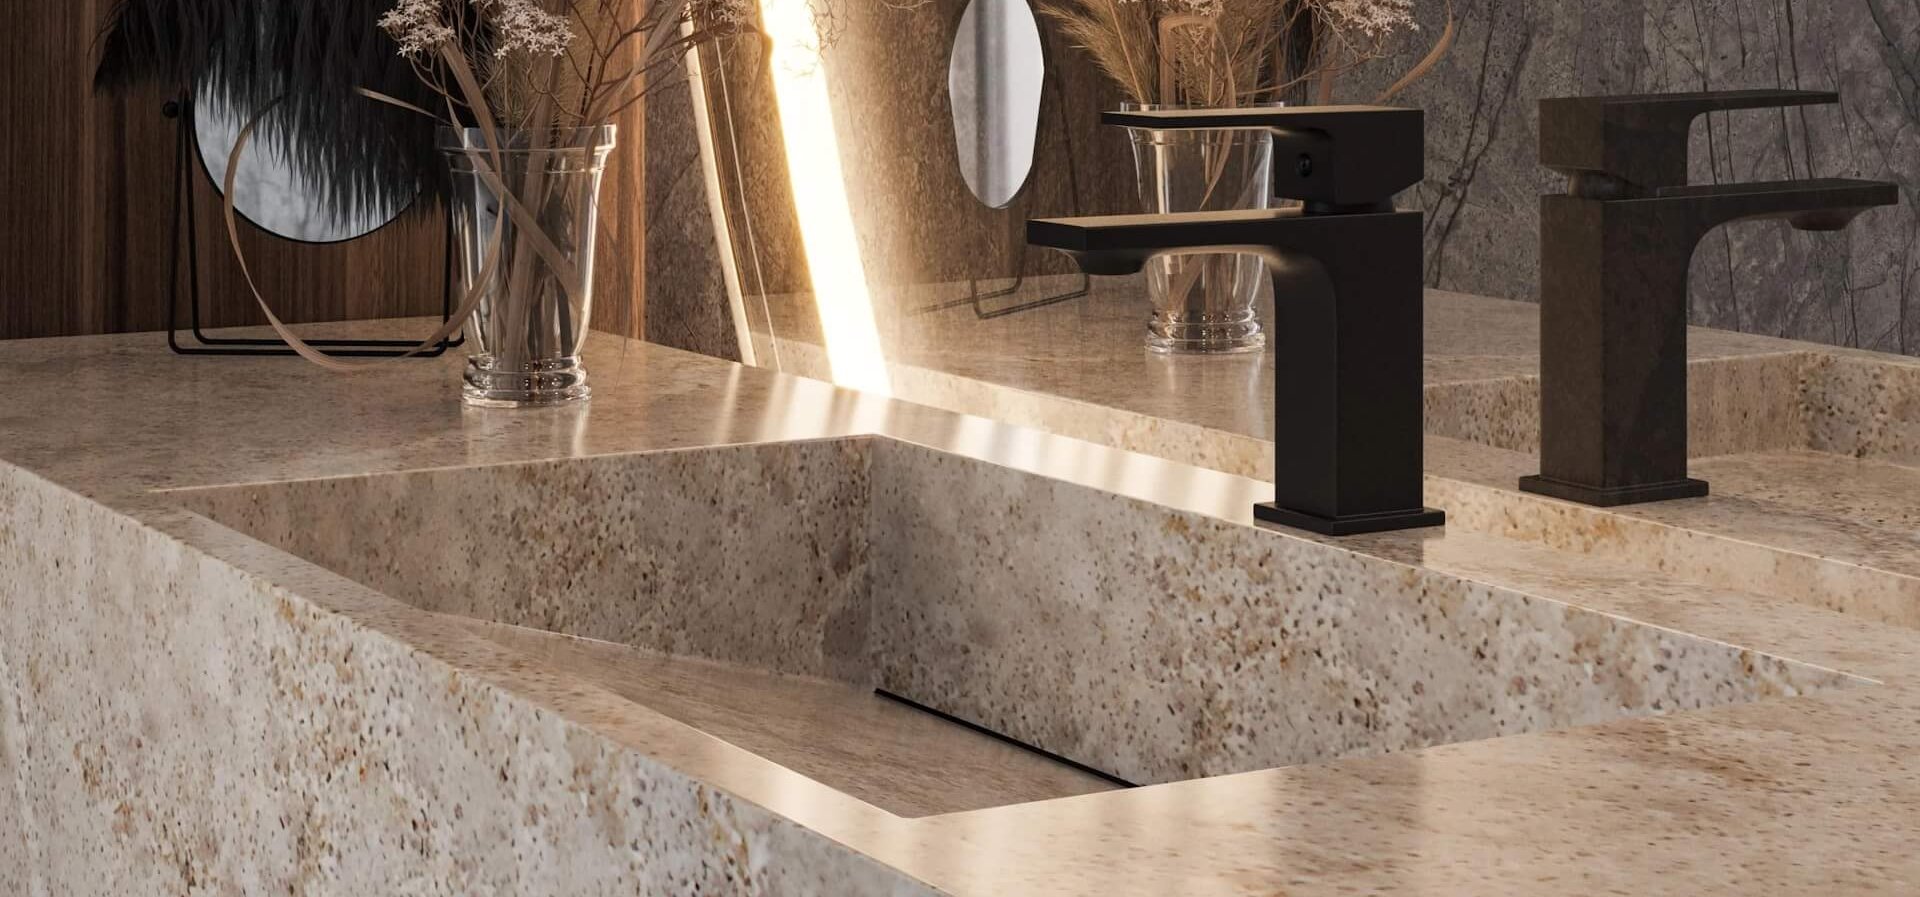 3D Rendering of a Natural Stone Bathroom Washbasin